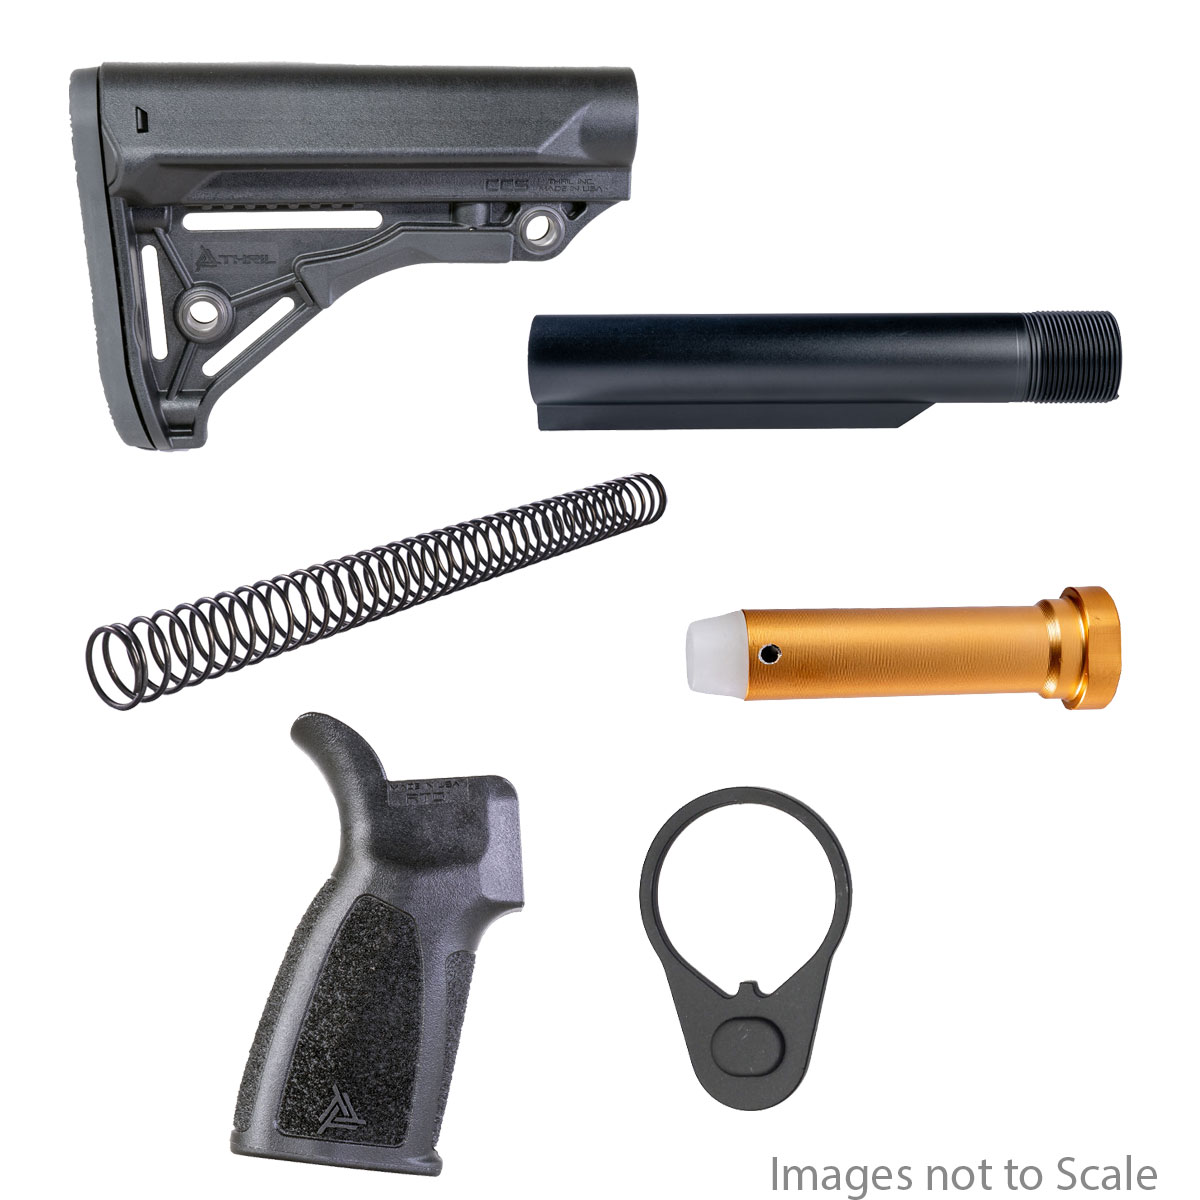 Finish Your Lower Kit: THRIL Combat Competition Stock + Mil-Spec Heavy-Duty 6-Position Buffer Tube + AR-15 Carbine Recoil Spring + Mil-Spec Receiver End Plate + AR-15 Standard Carbine Recoil Buffer + Thril Rugged Tactical Grip